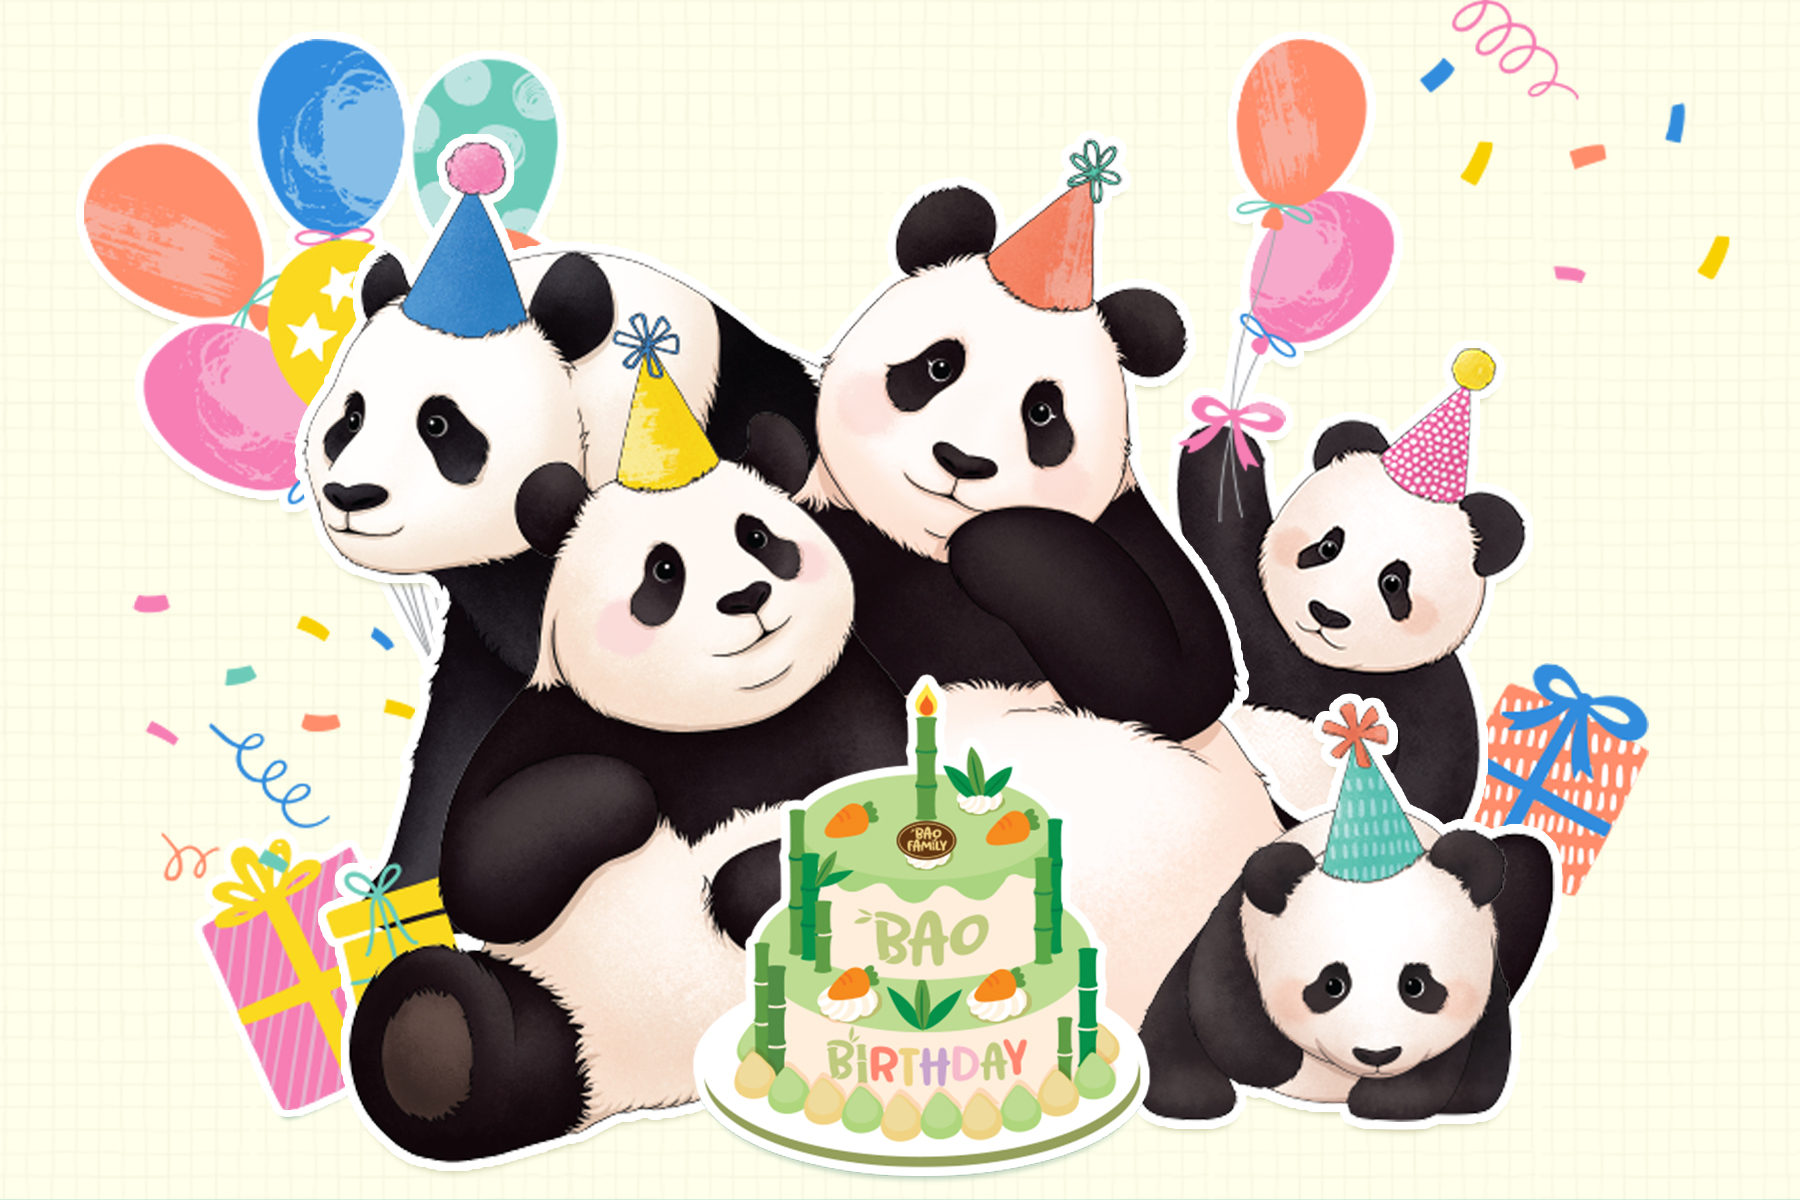 You're invited to the Bao Family's Panda Birthday celebrations this July at Everland!